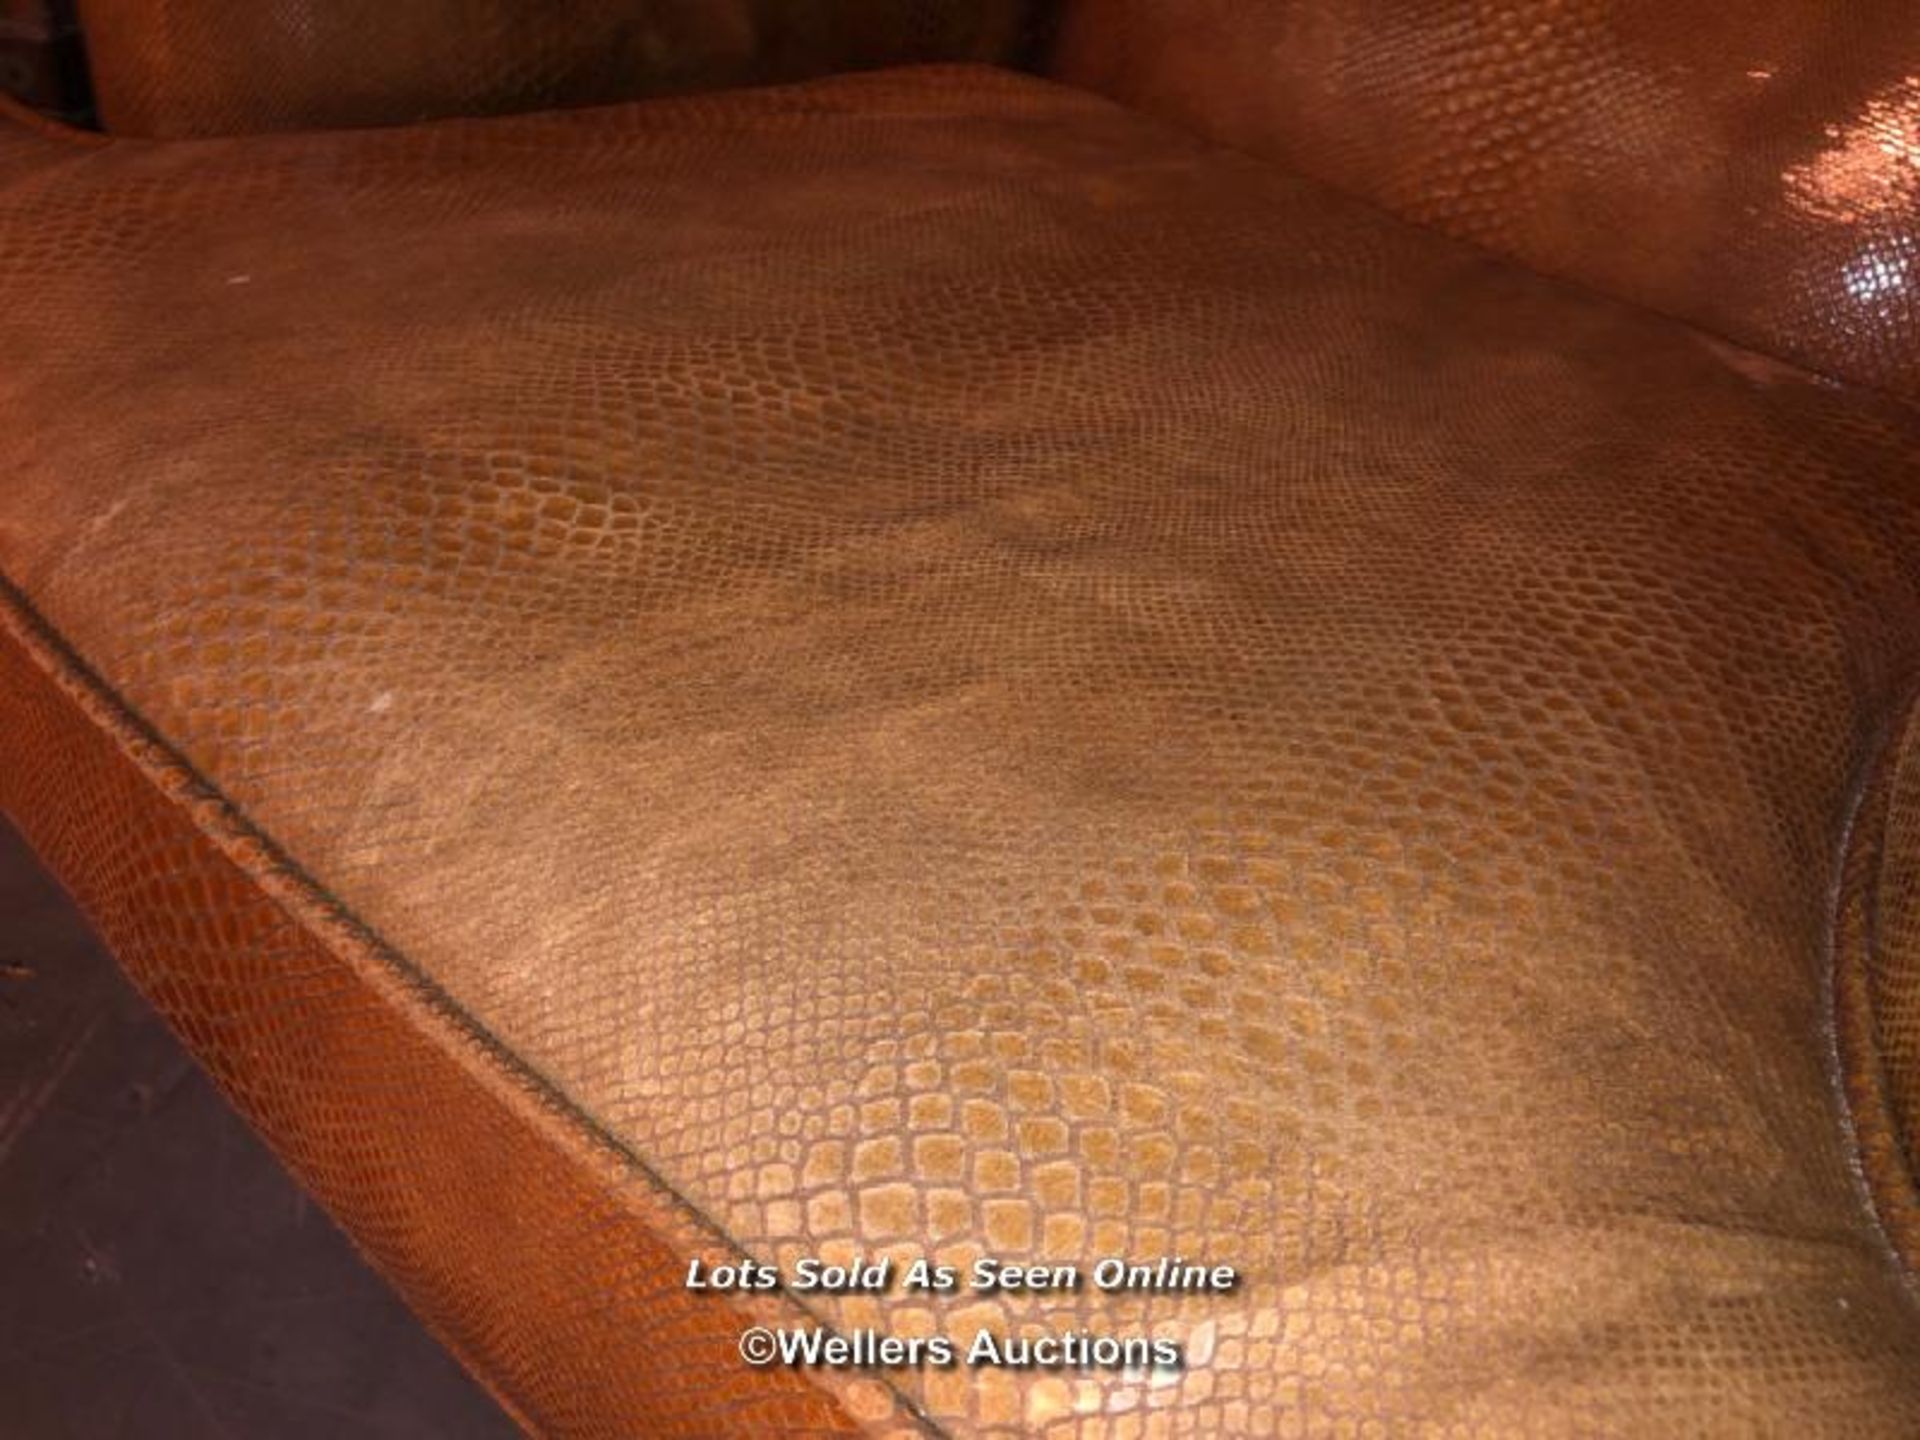 20TH CENTURY FAUX SNAKE SKIN LEATHER WING BACK CHAIR, CABRIOLE LEG, 74 X 65 X 110CM - Image 4 of 4